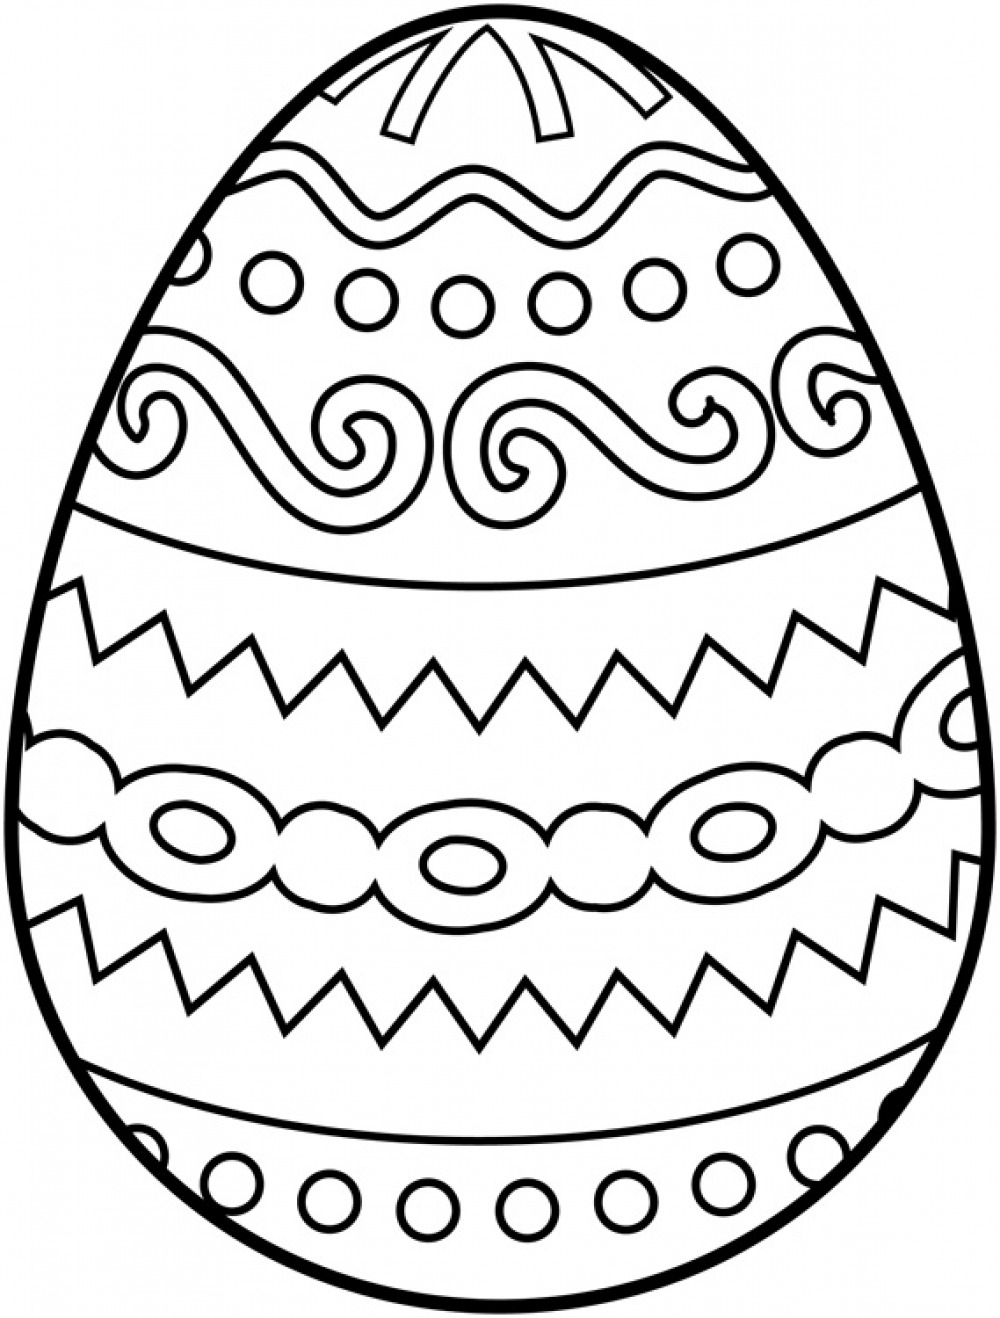 Coloring Pages ~ Free Printable Easteroring Pages Of Jesus For Kids - Free Printable Easter Coloring Pictures